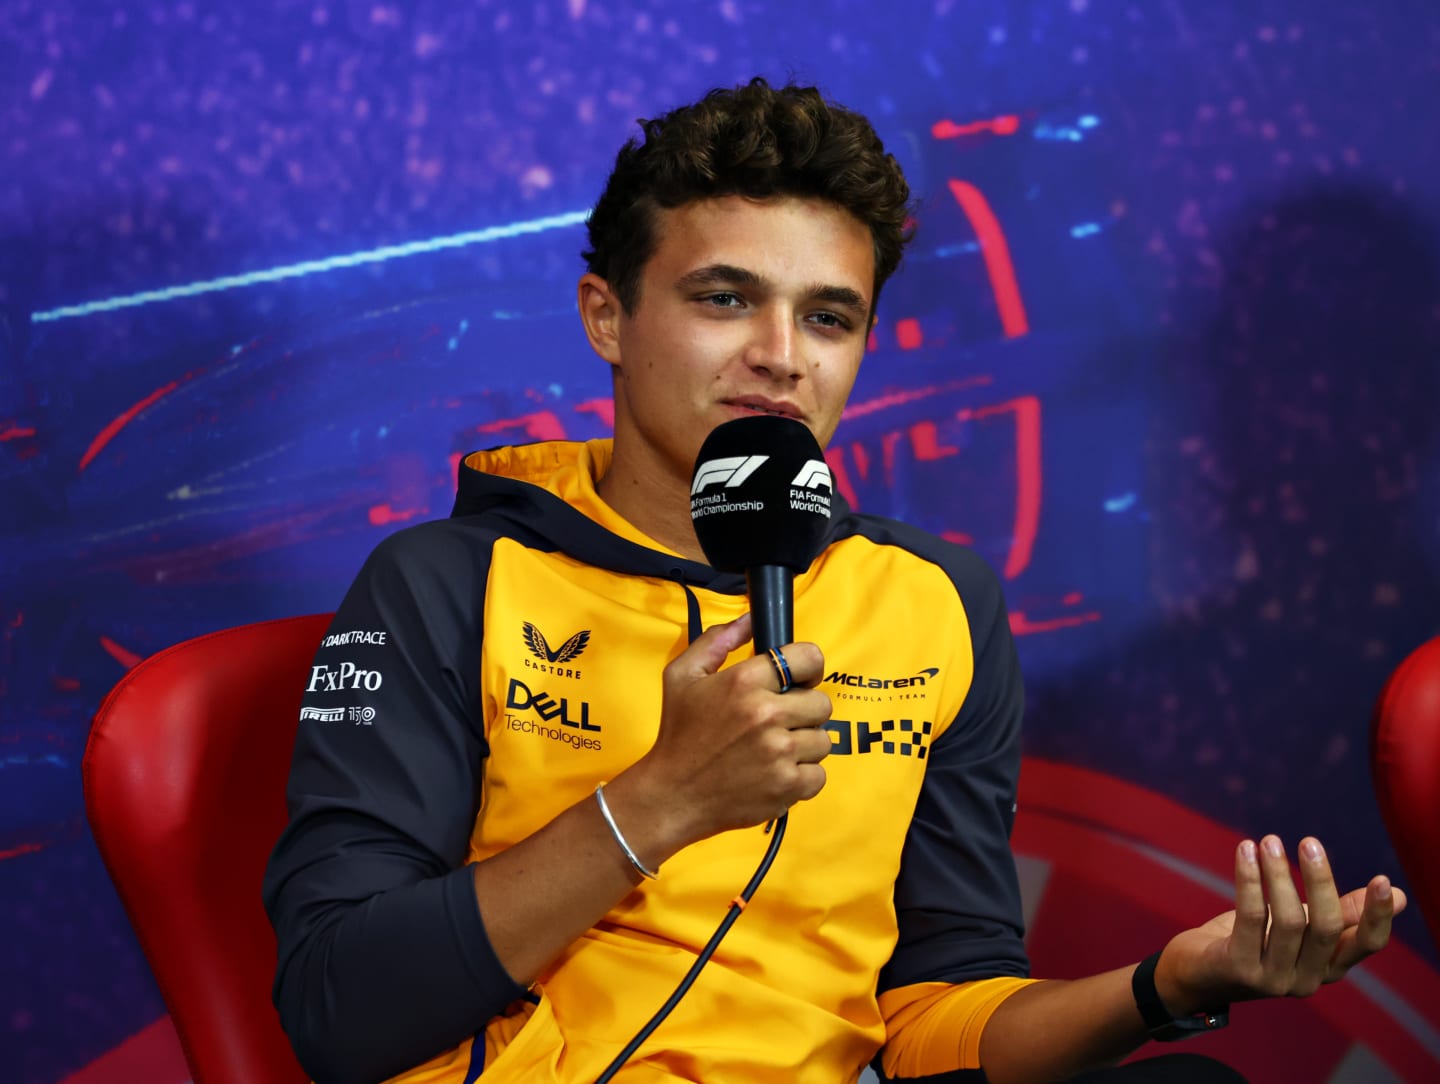 LE CASTELLET, FRANCE - JULY 21: Lando Norris of Great Britain and McLaren talks in the Drivers Press Conference during previews ahead of the F1 Grand Prix of France at Circuit Paul Ricard on July 21, 2022 in Le Castellet, France. (Photo by Bryn Lennon/Getty Images)